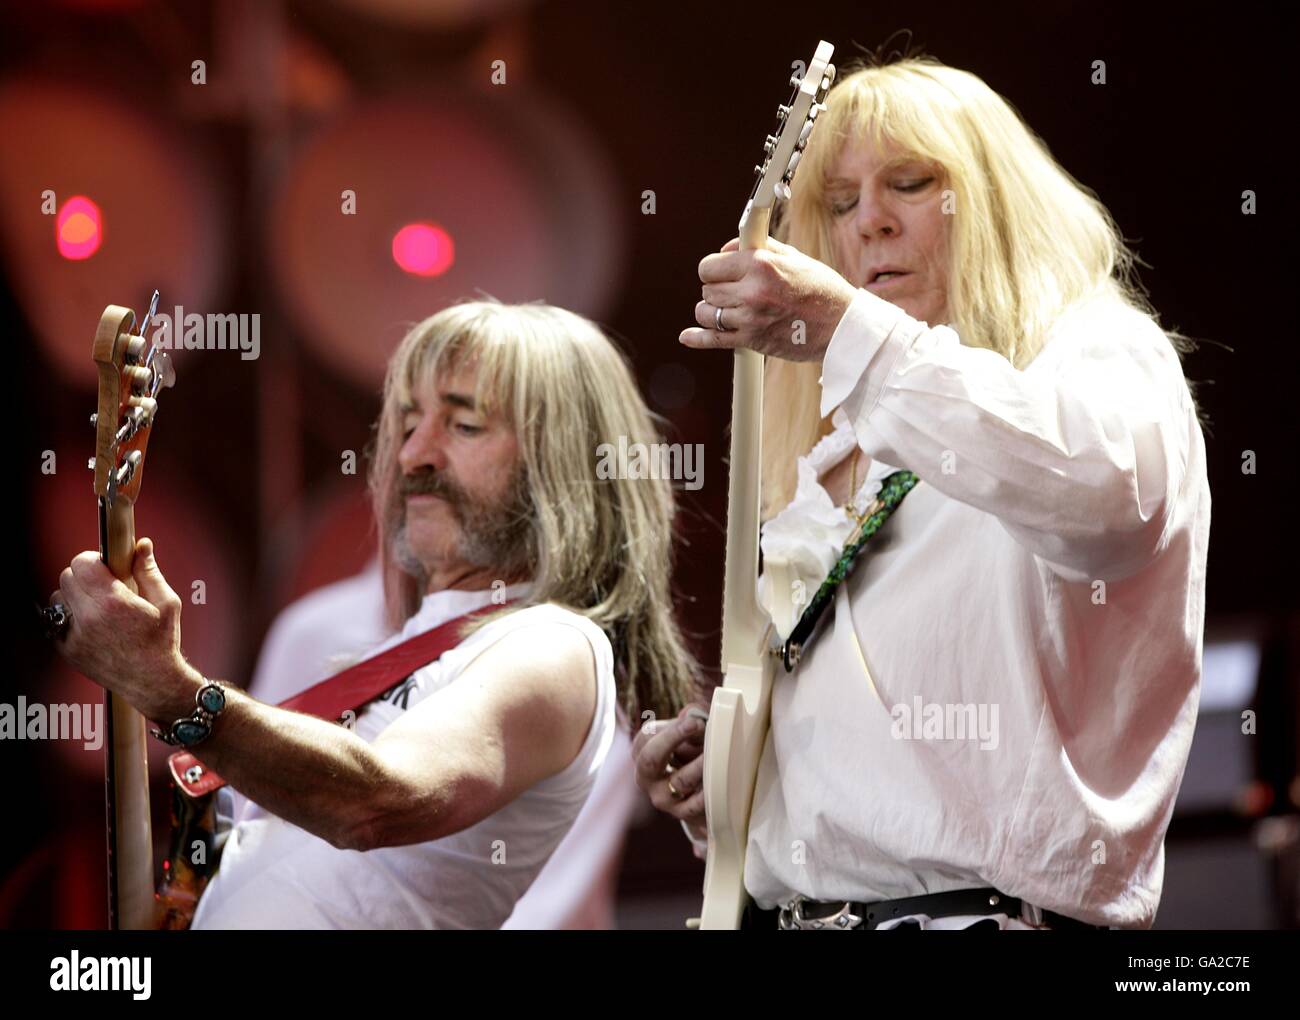 Harry Shearer and Michael McKean (right) members of the fictional band Spinal Tap performs during the charity concert at Wembley Stadium, London. Stock Photo